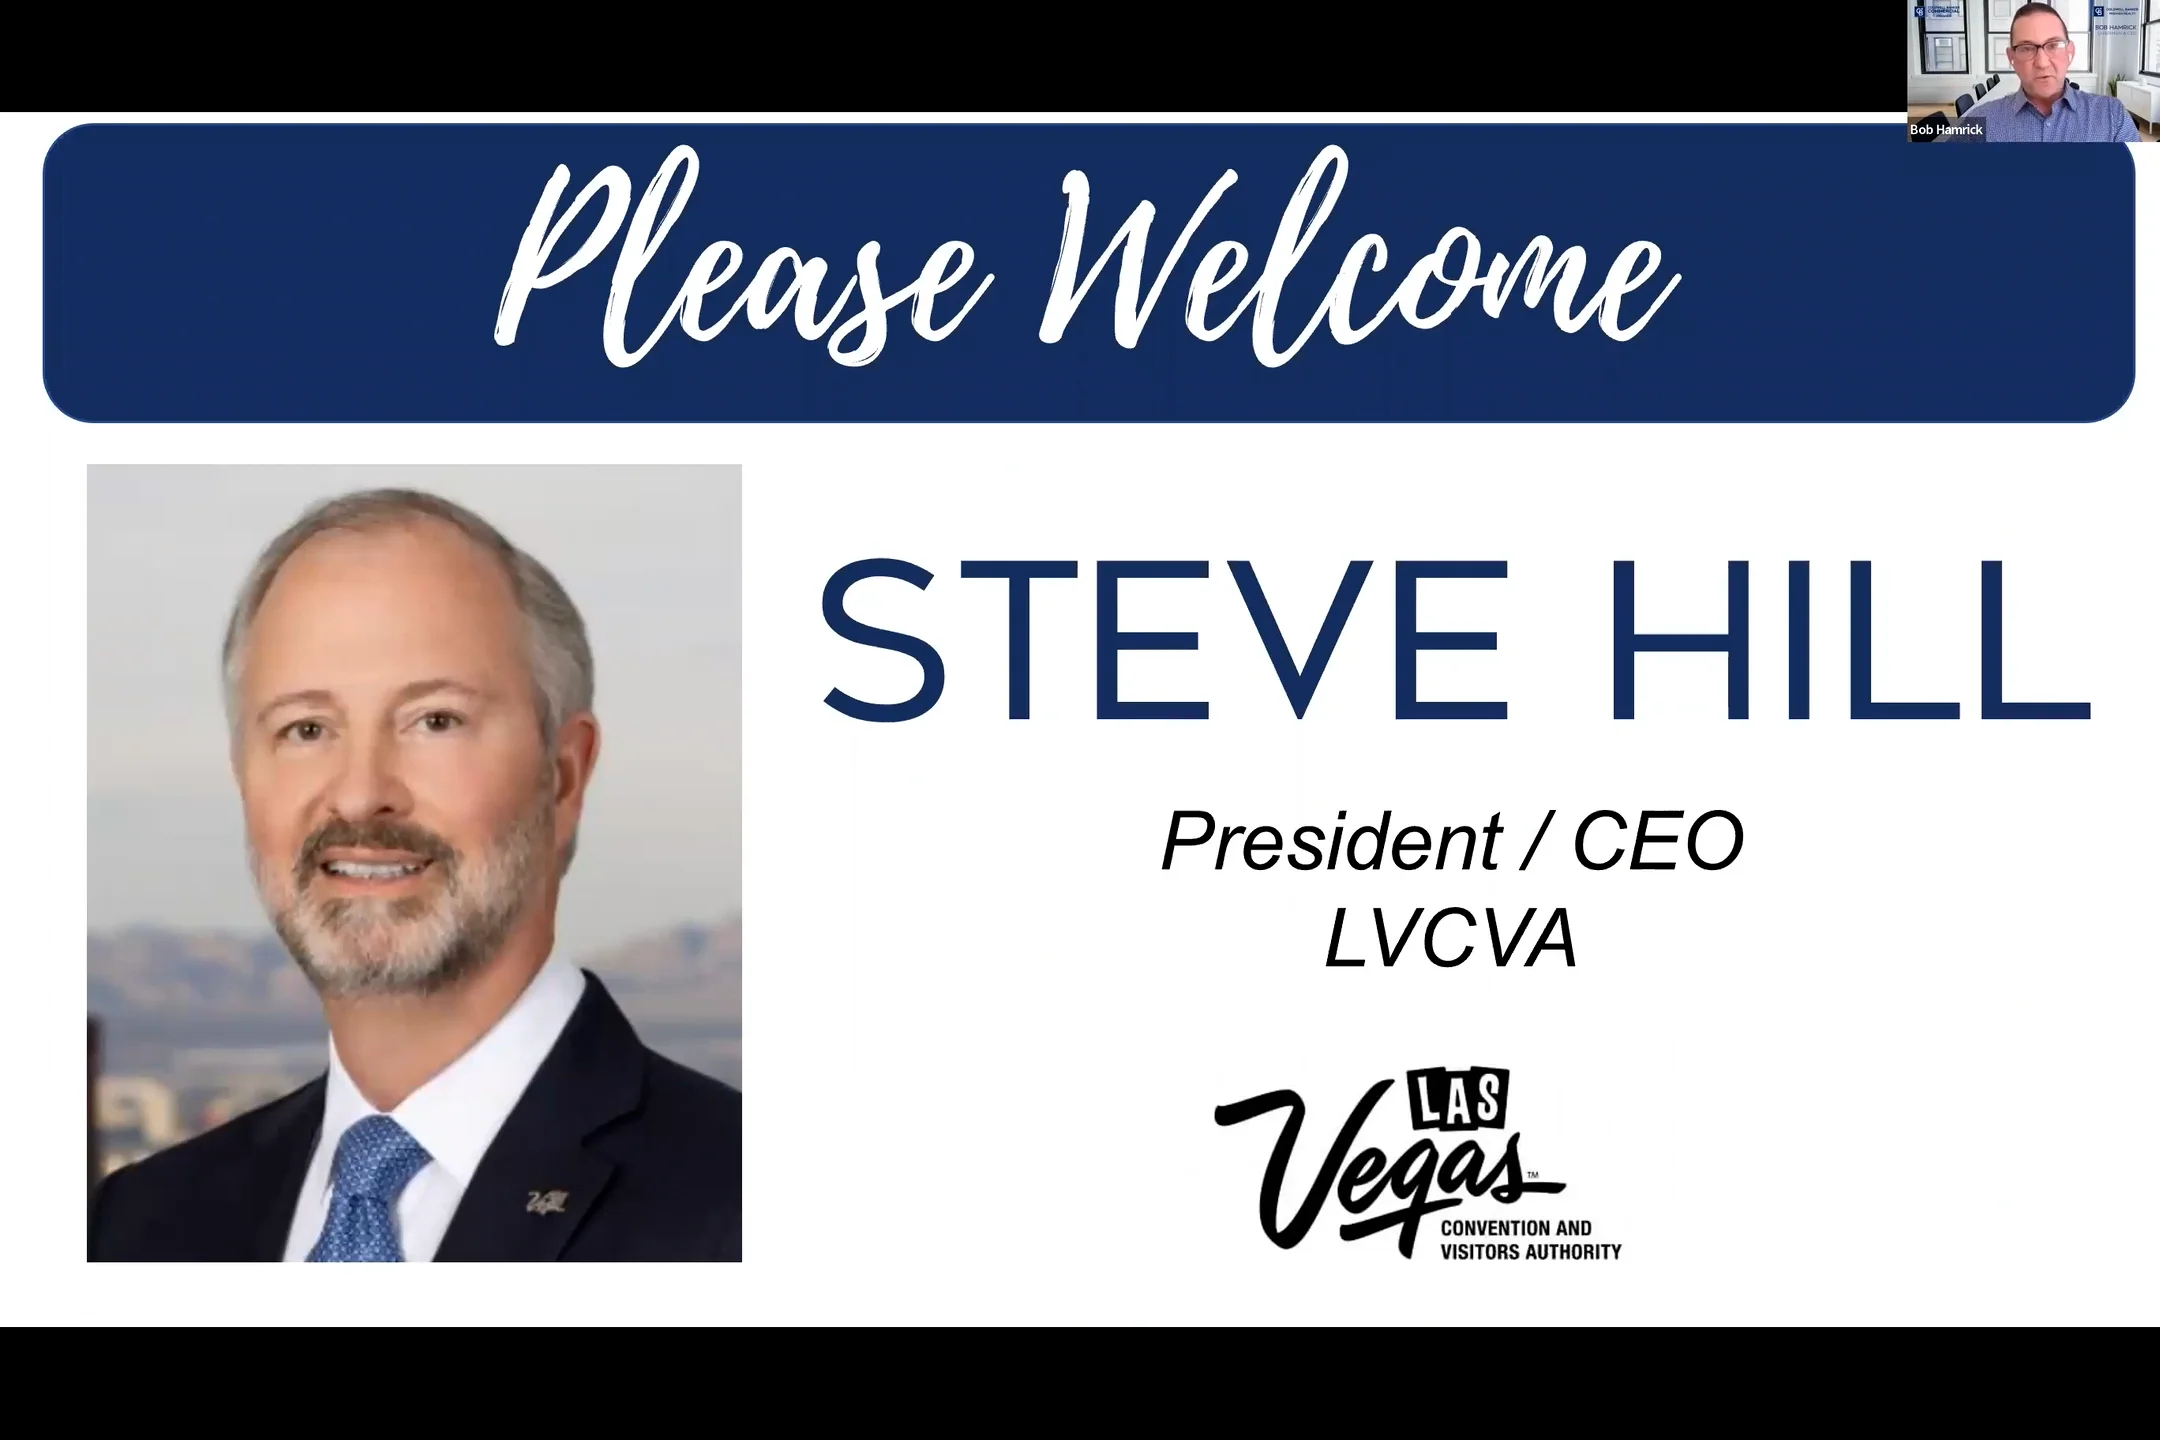 Steve Hill Named CEO of the Las Vegas Convention and Visitors